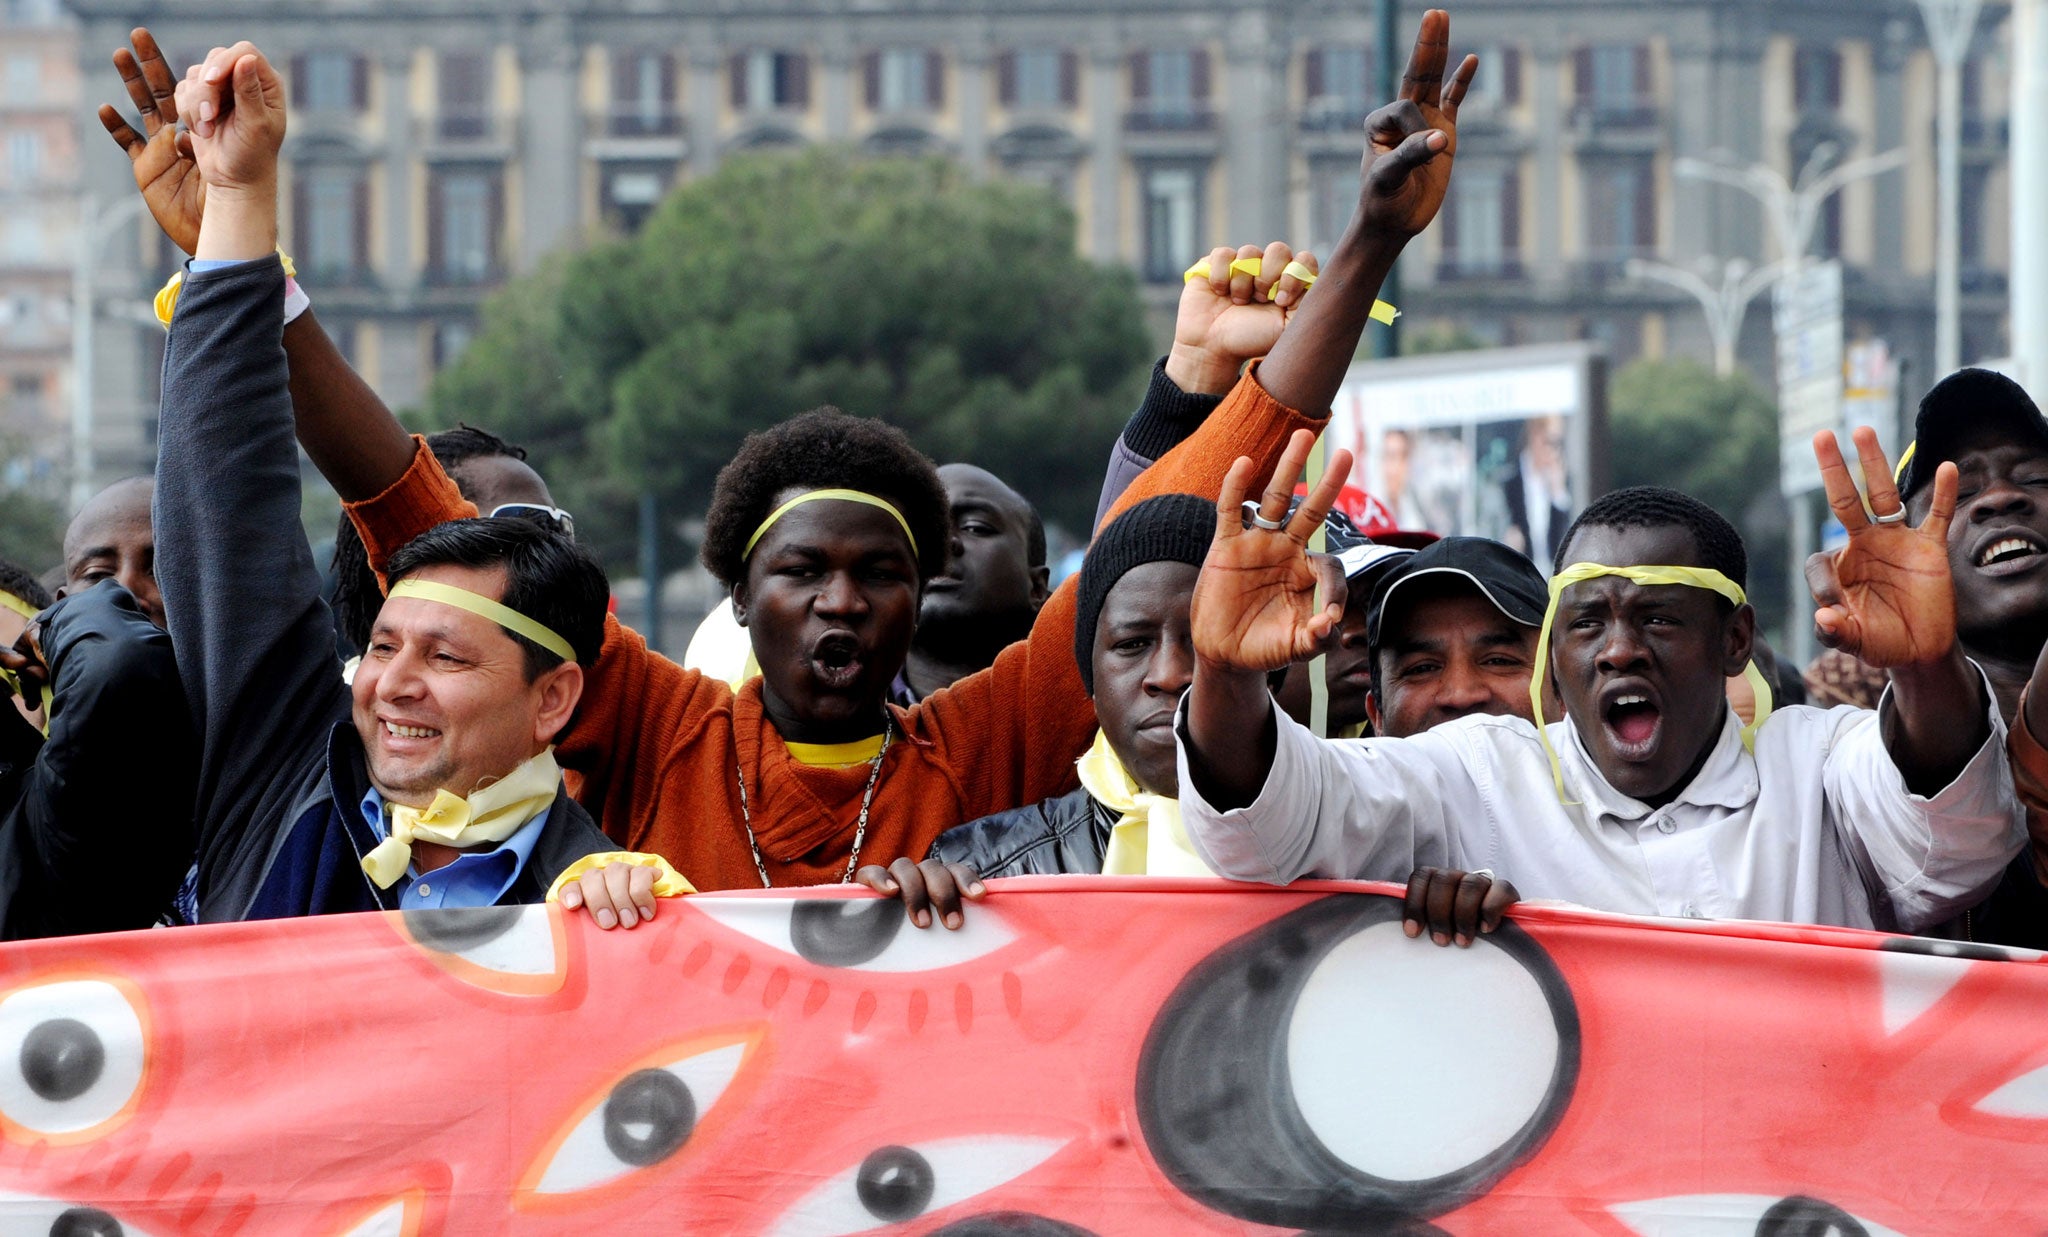 Kurdish and Cuban immigrants in Italy hold their national flags during the first Italian National Strike by immigrants in the country in Naples on March 1, 2010.